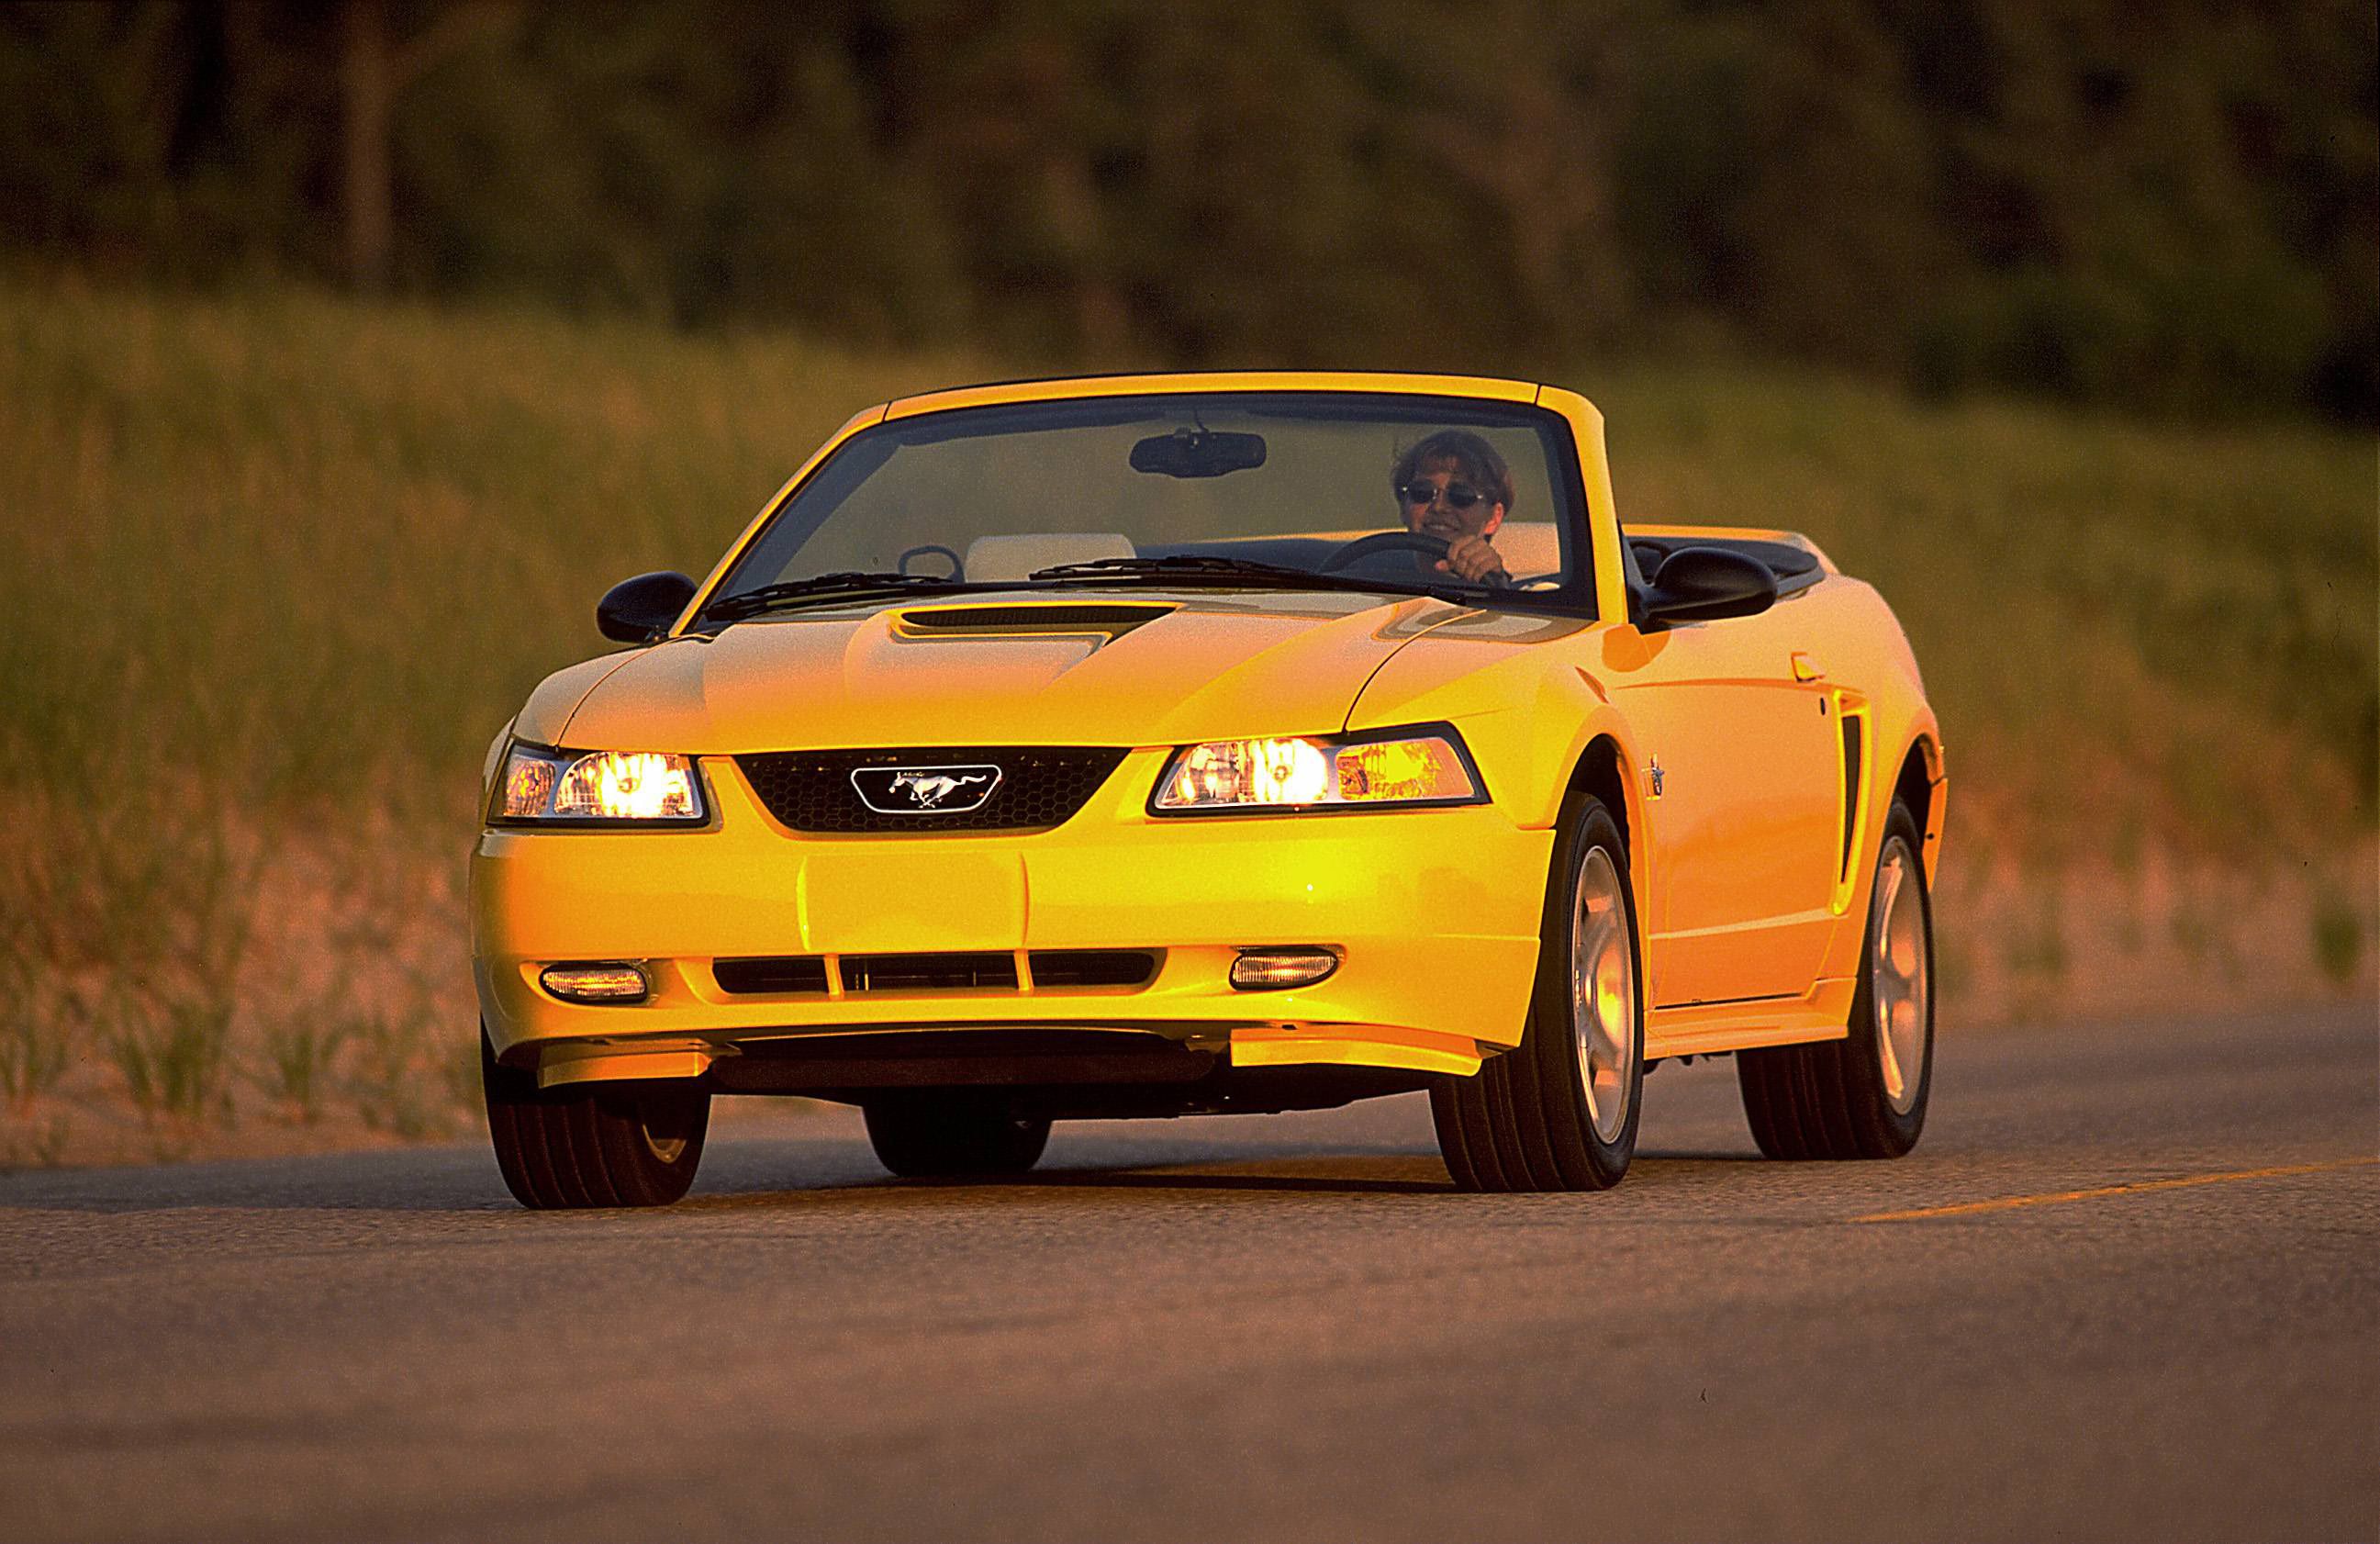 A 1999 Ford Mustang GT on the open road